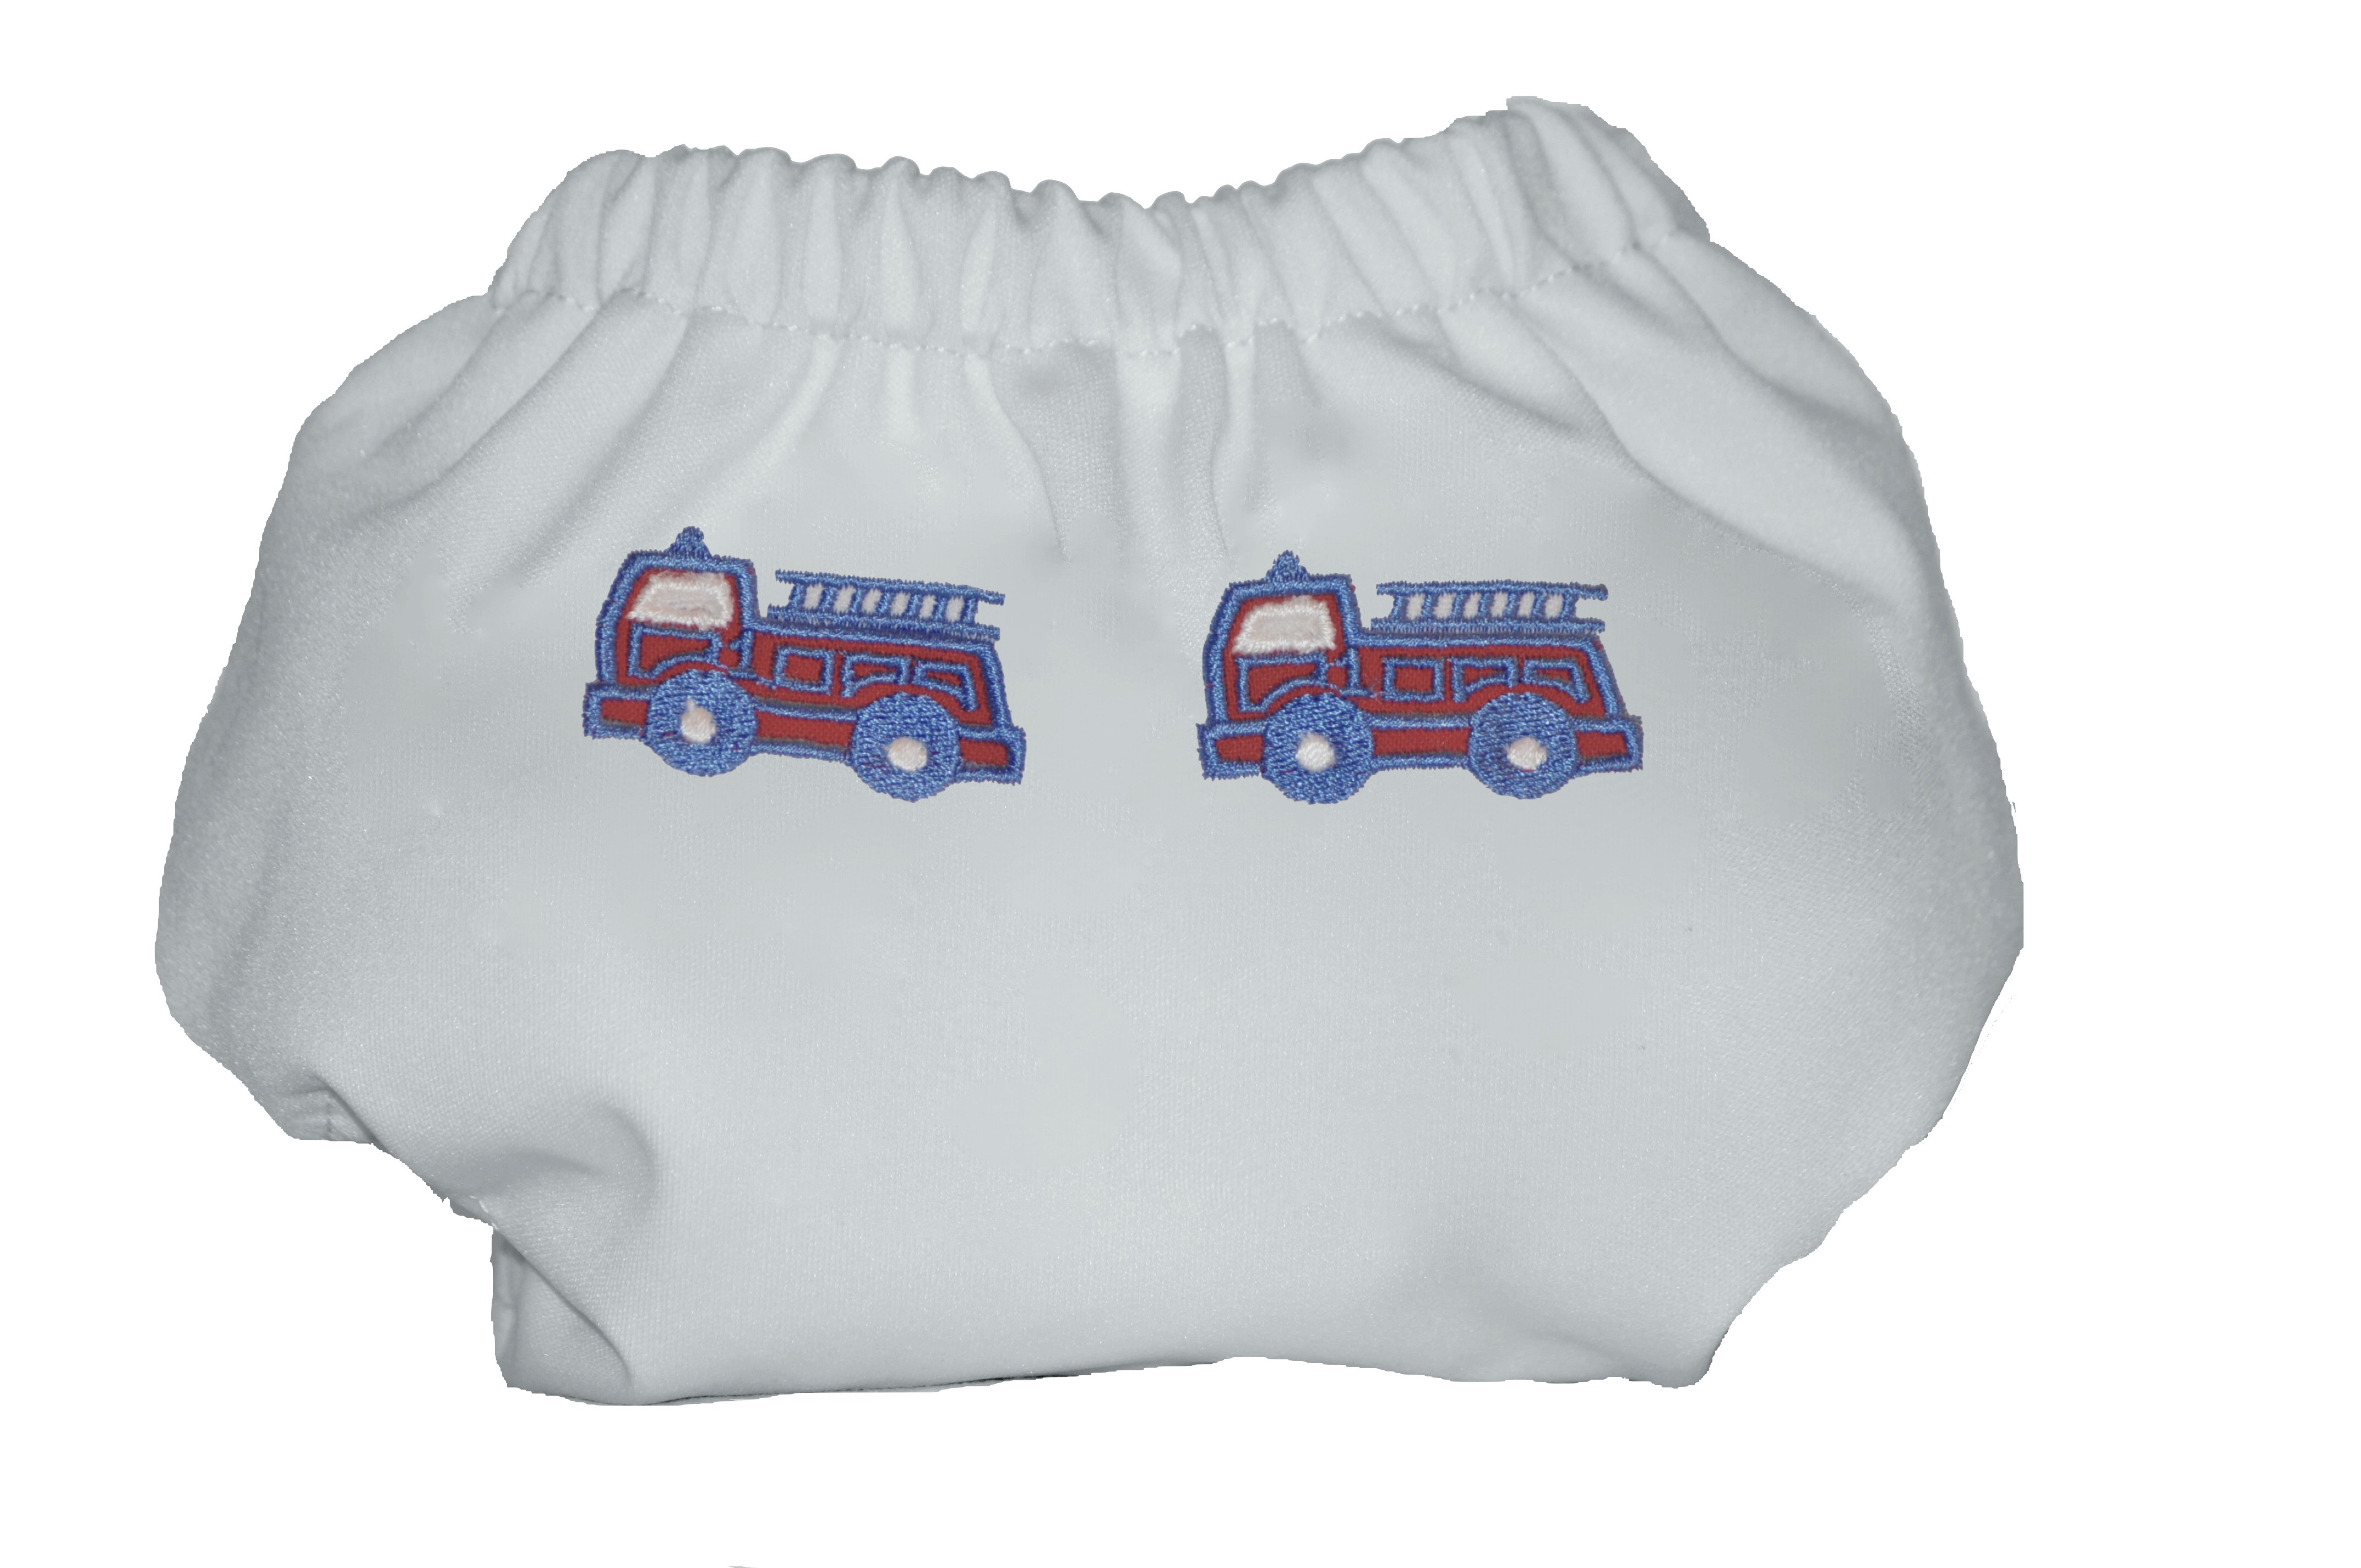 AllComfy One Size Diaper Cover Snap Closure (2 Pack) "Brave"